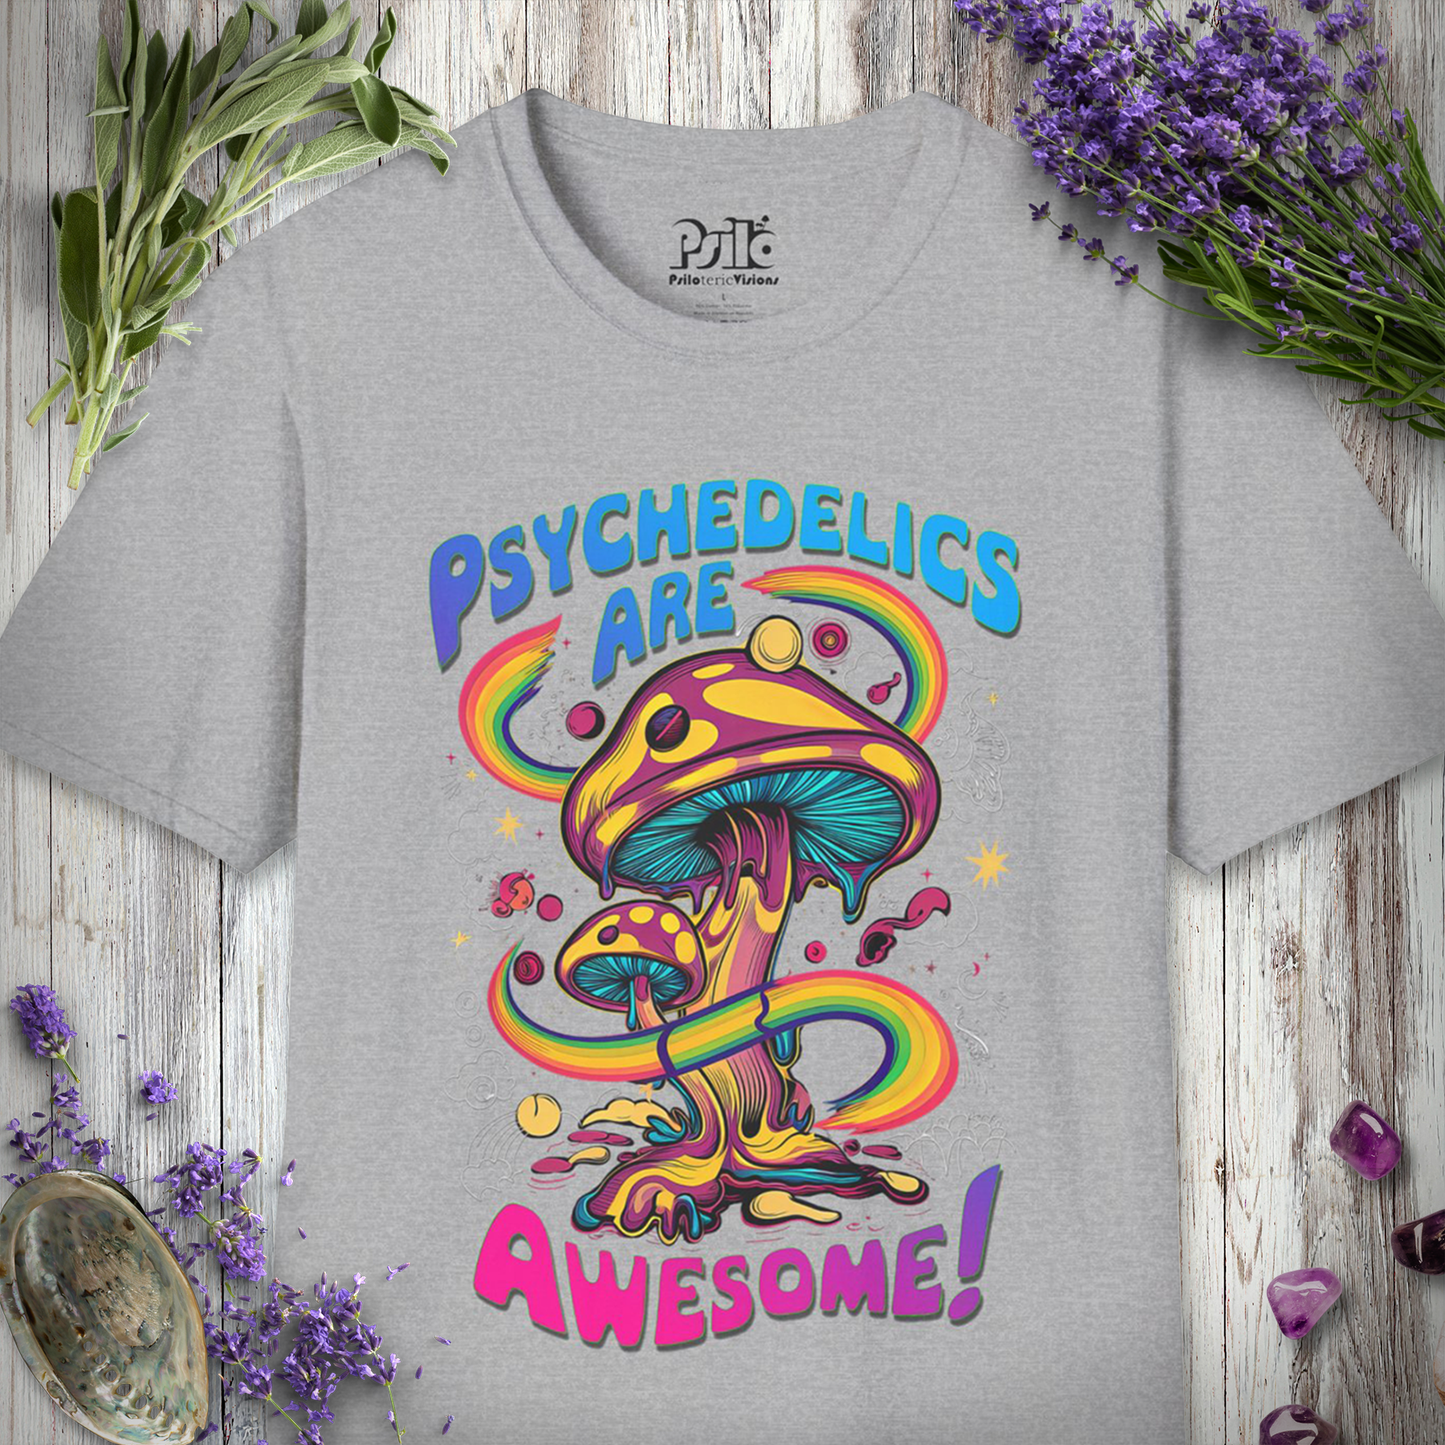 "Psychedelics Are Awesome" Unisex T-SHIRT